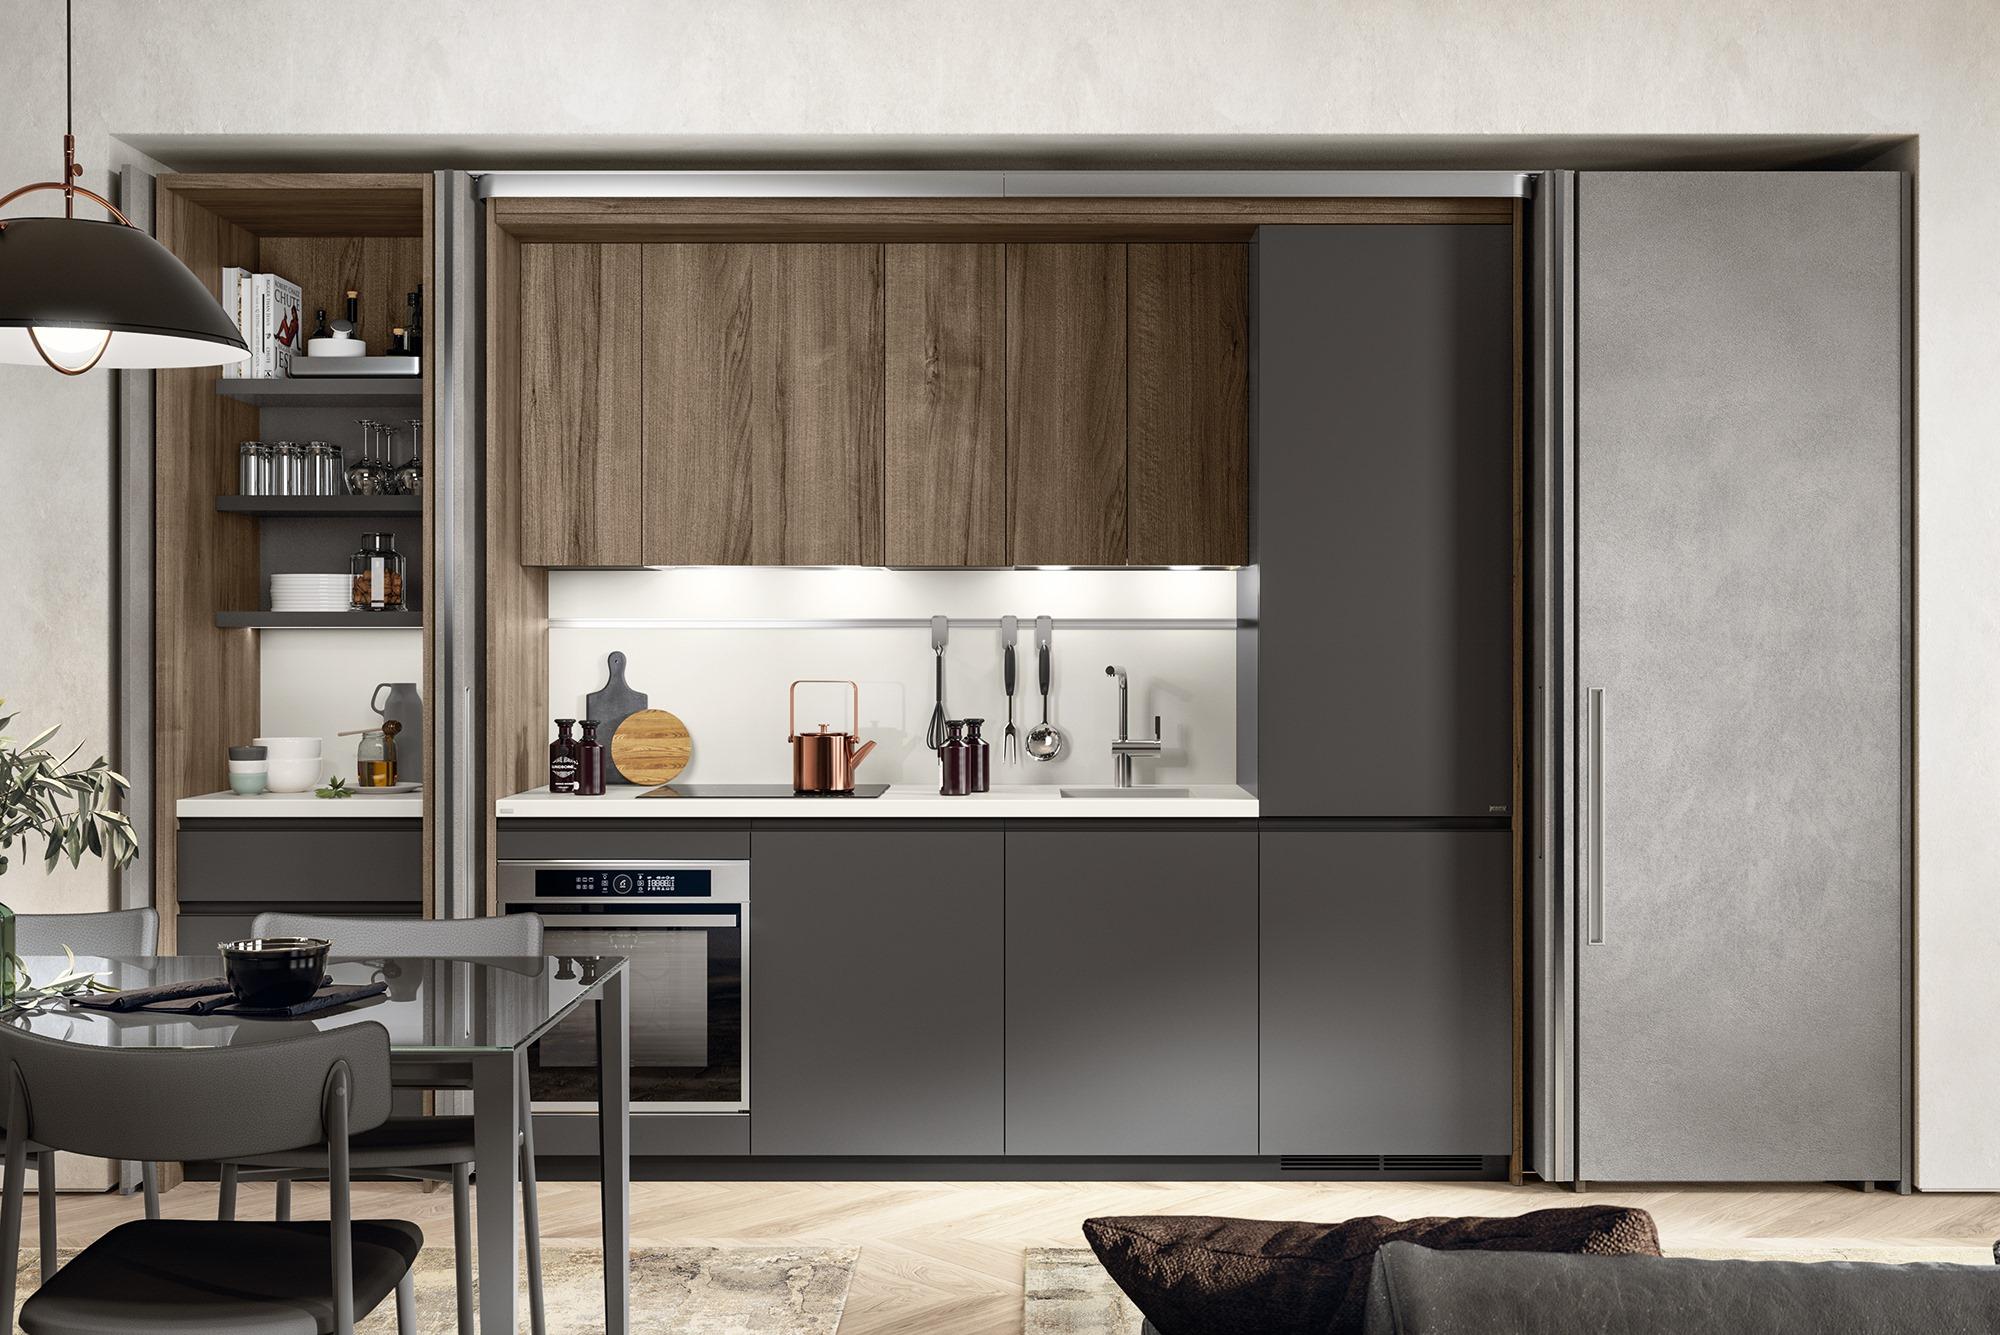 Italian Kitchens Are Too Modern… and Hidden!